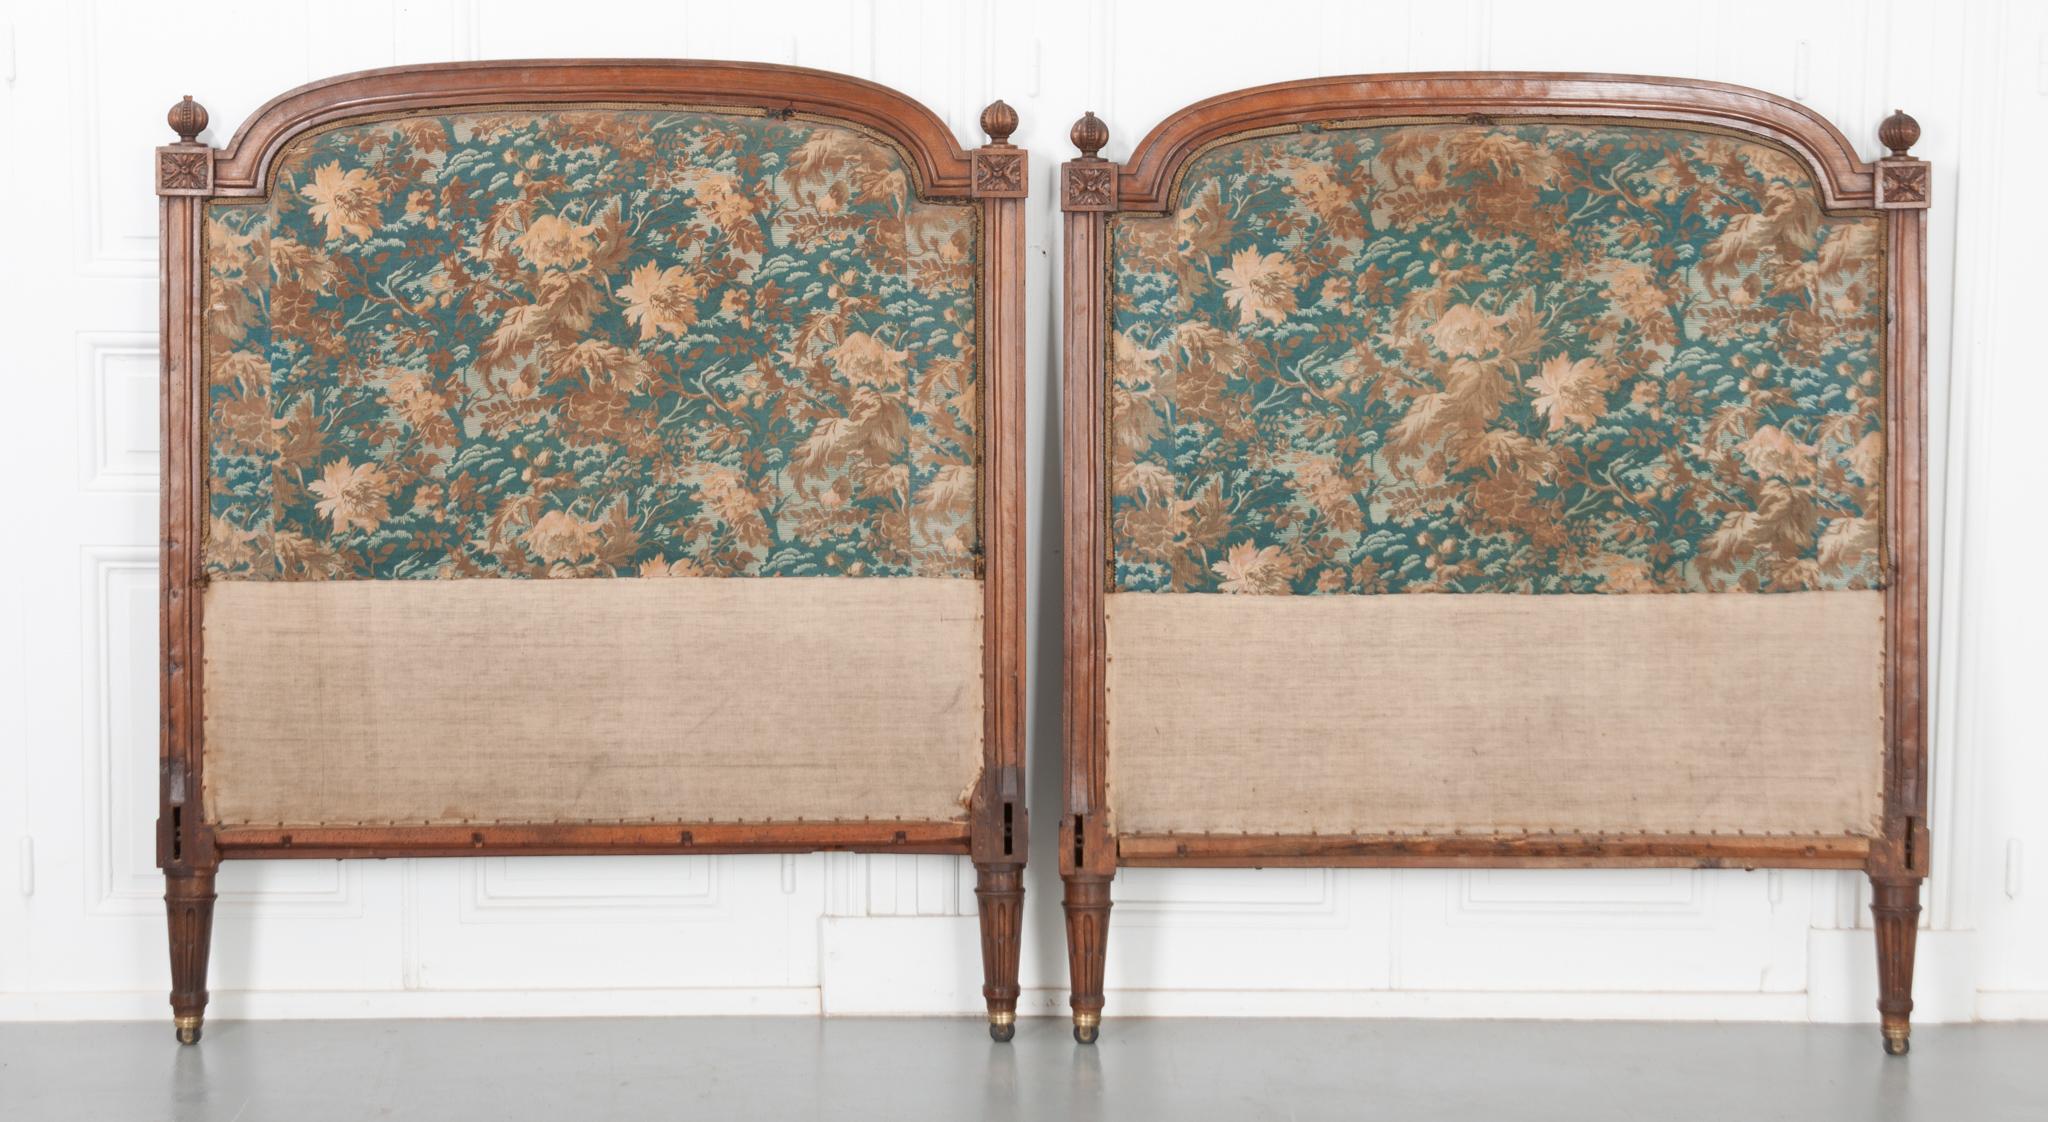 This pair of headboards are made of beautifully carved walnut and original upholstery from the 19th Century. The wood has a wonderful tone and patina. It has square, fluted columns on each side with an intricately carved square with a rossett and